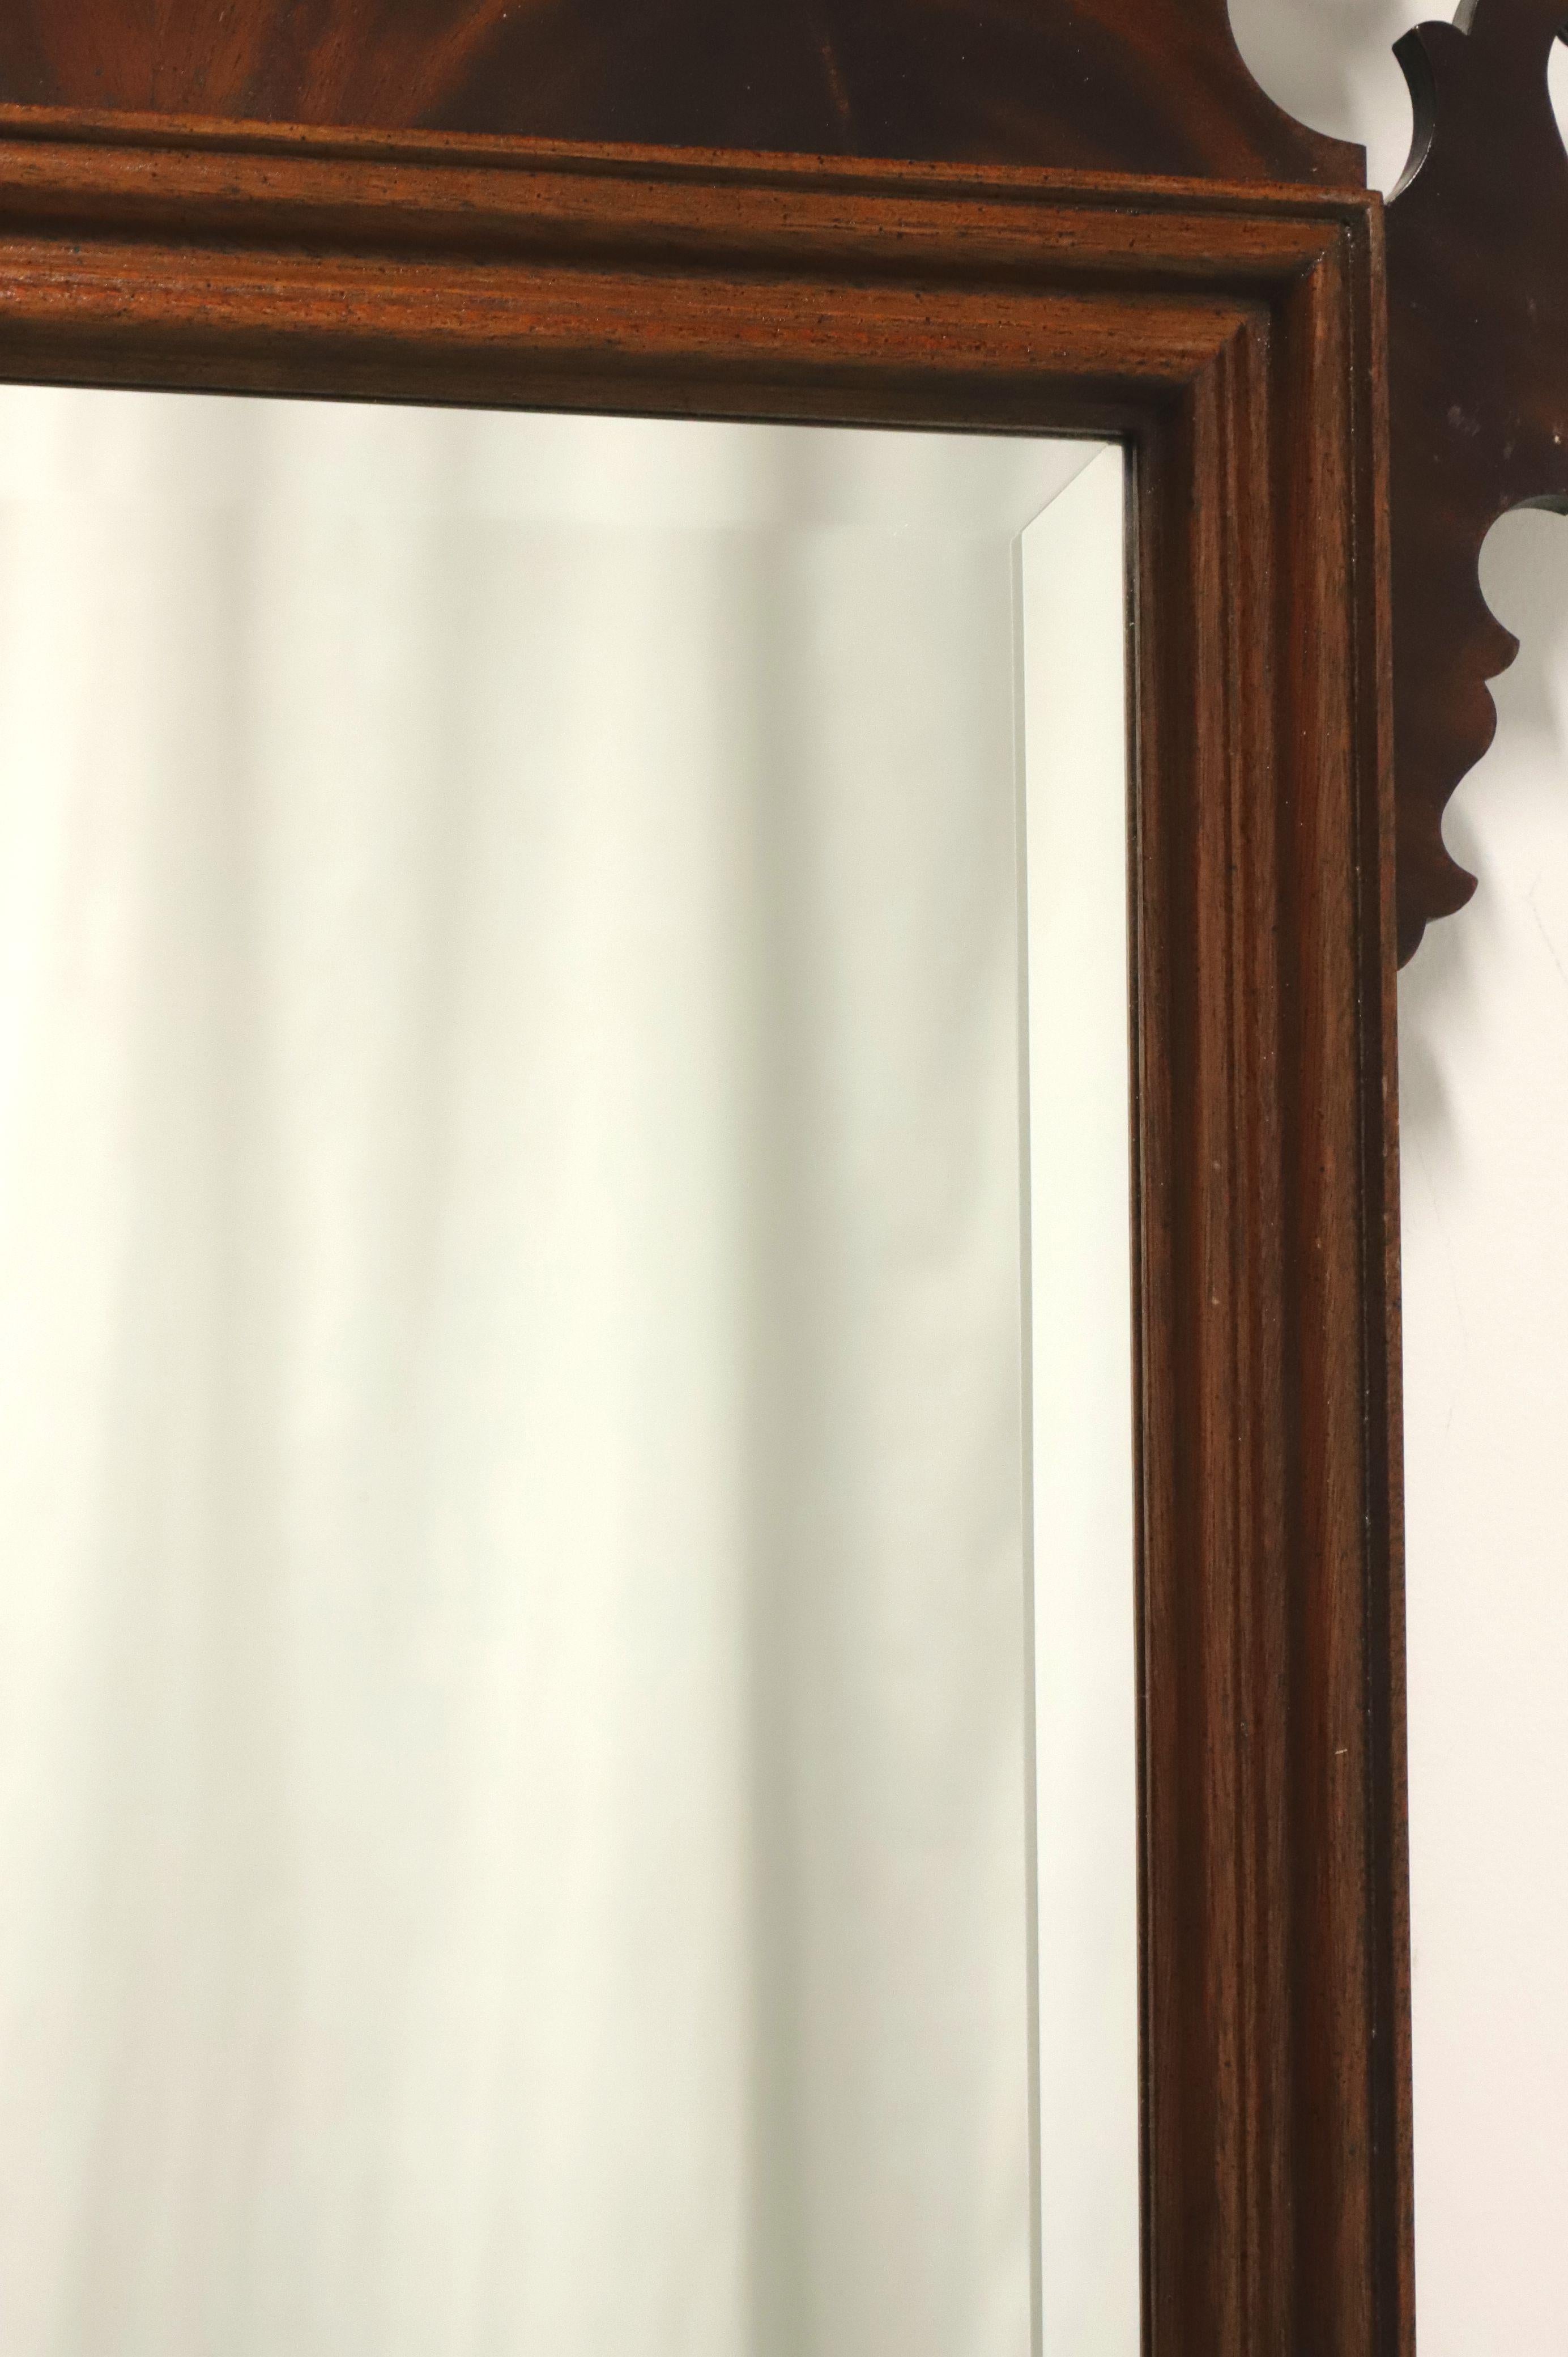 HEKMAN Crotch Mahogany Chippendale Beveled Wall Mirror In Good Condition For Sale In Charlotte, NC